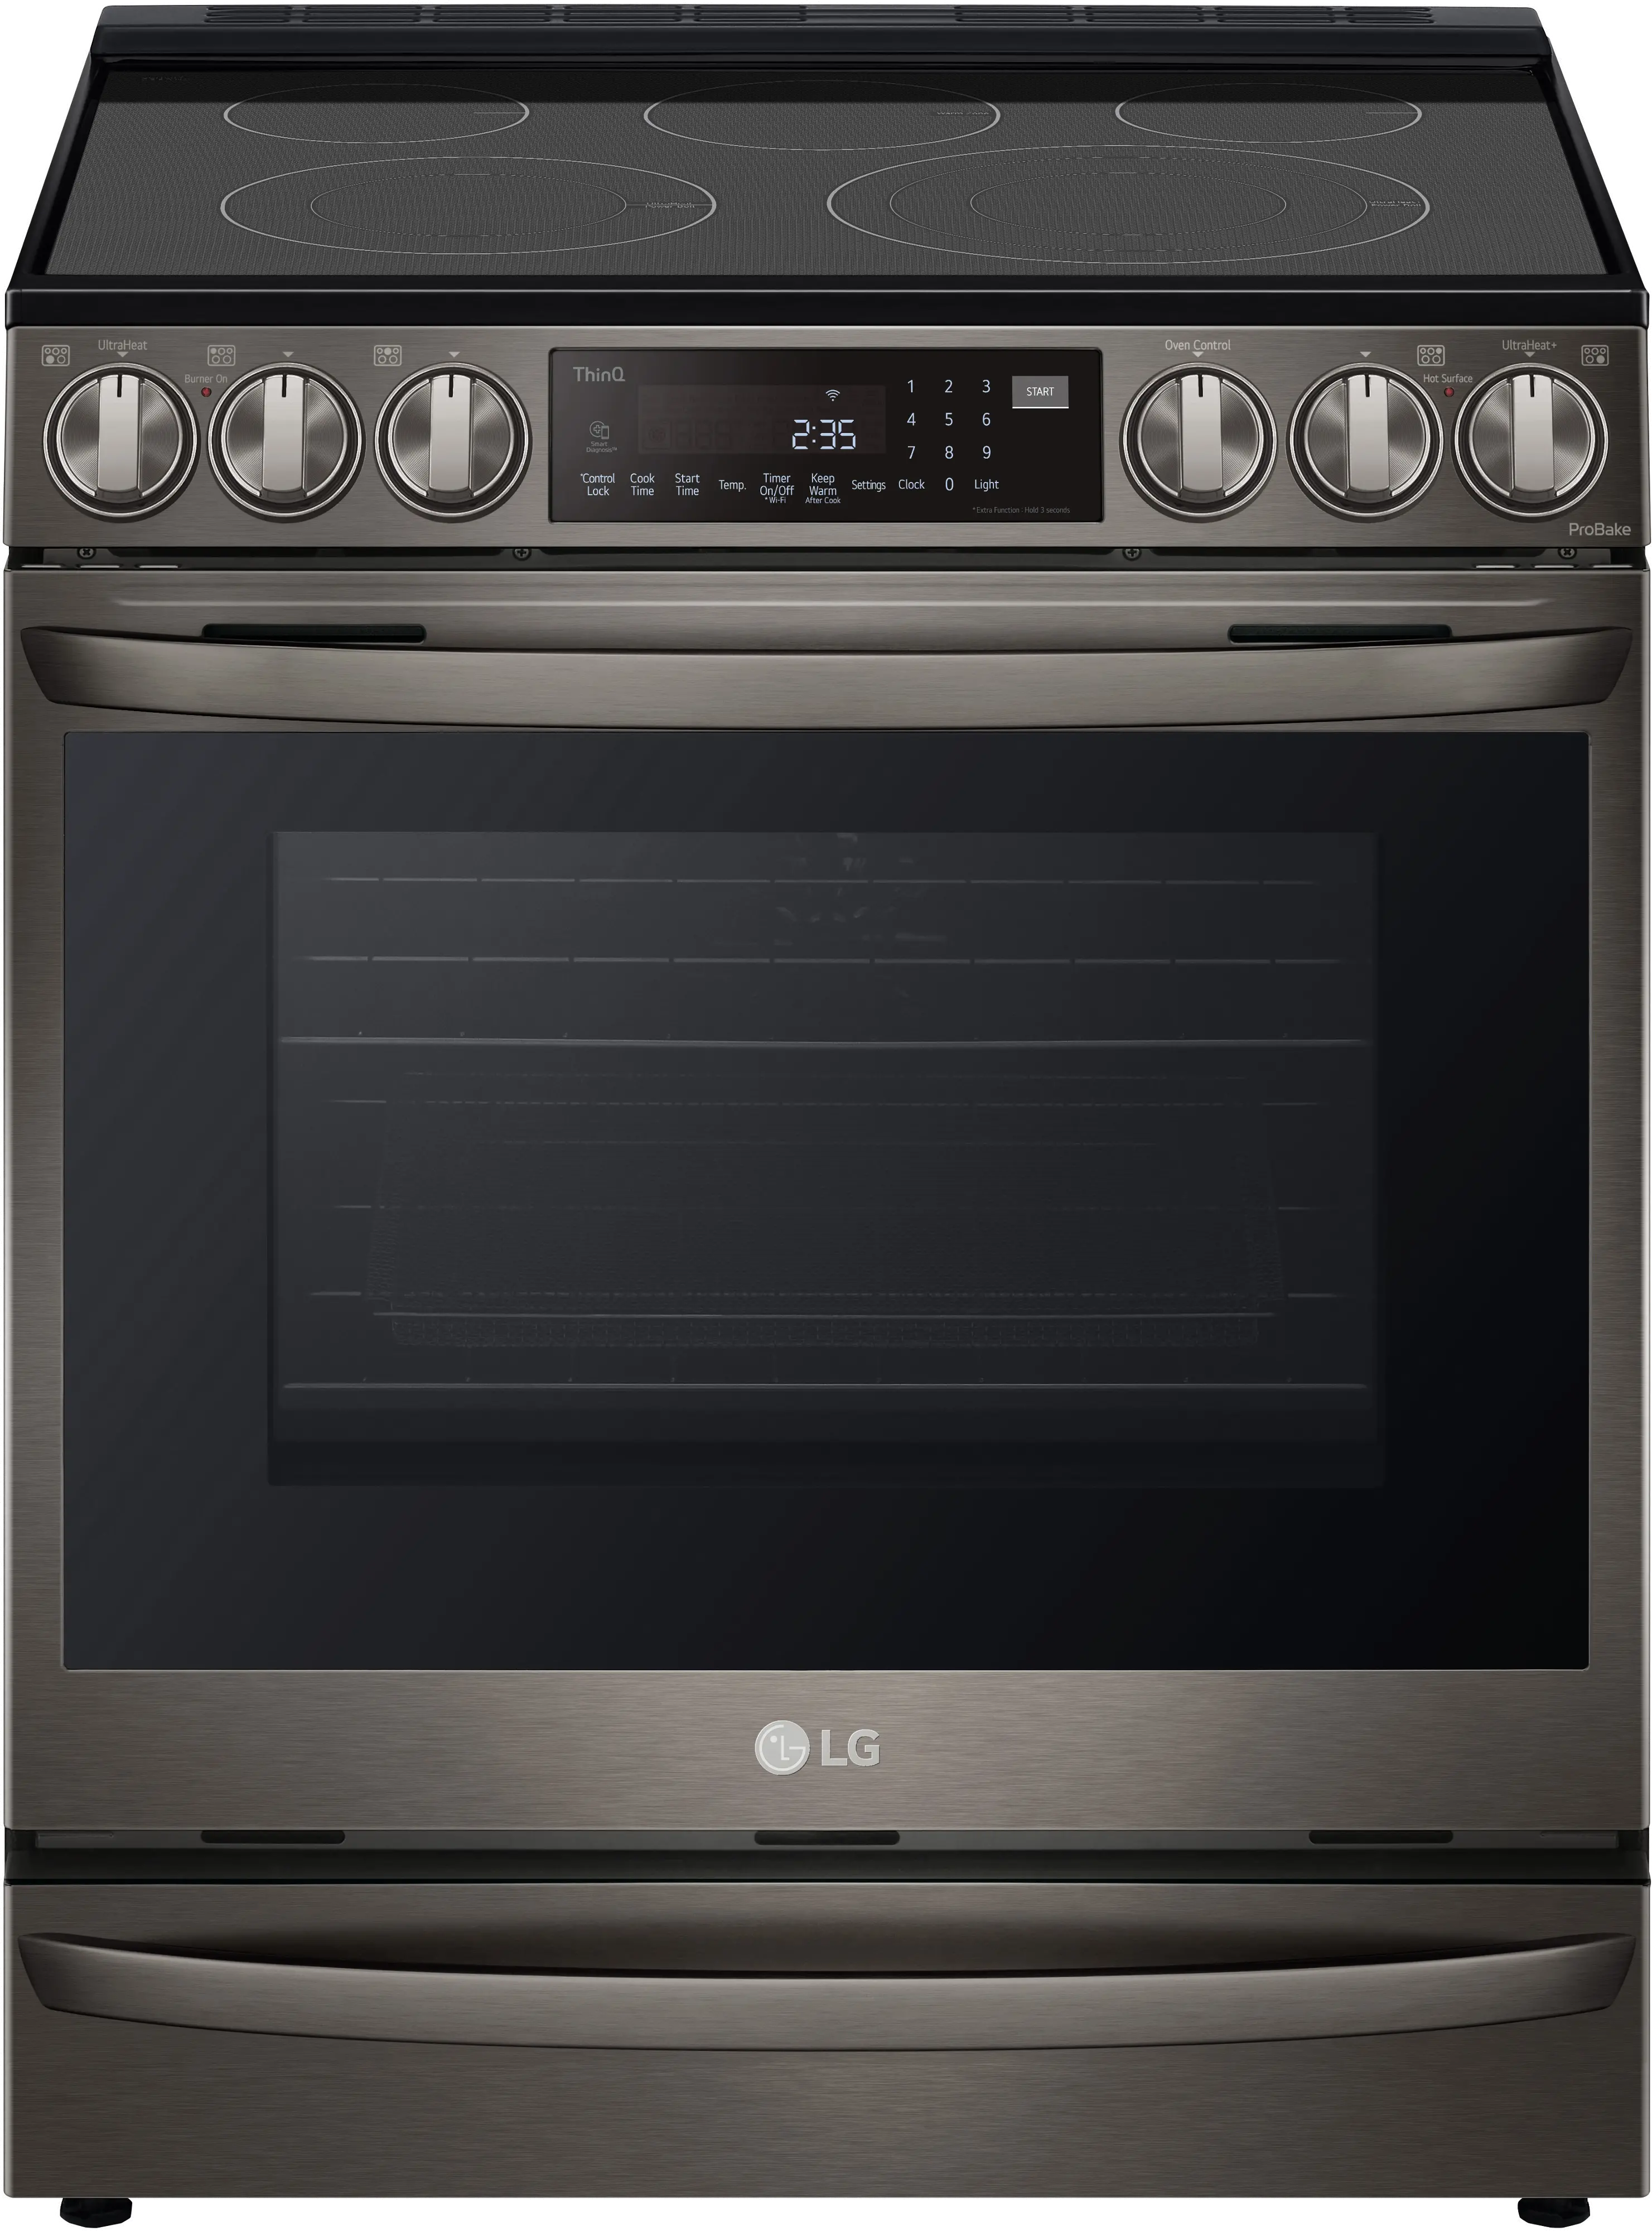 https://static.rcwilley.com/products/112274528/LG-6.3-cu-ft-Electric-Range-with-InstaView---Black-Stainless-Steel-rcwilley-image1.webp